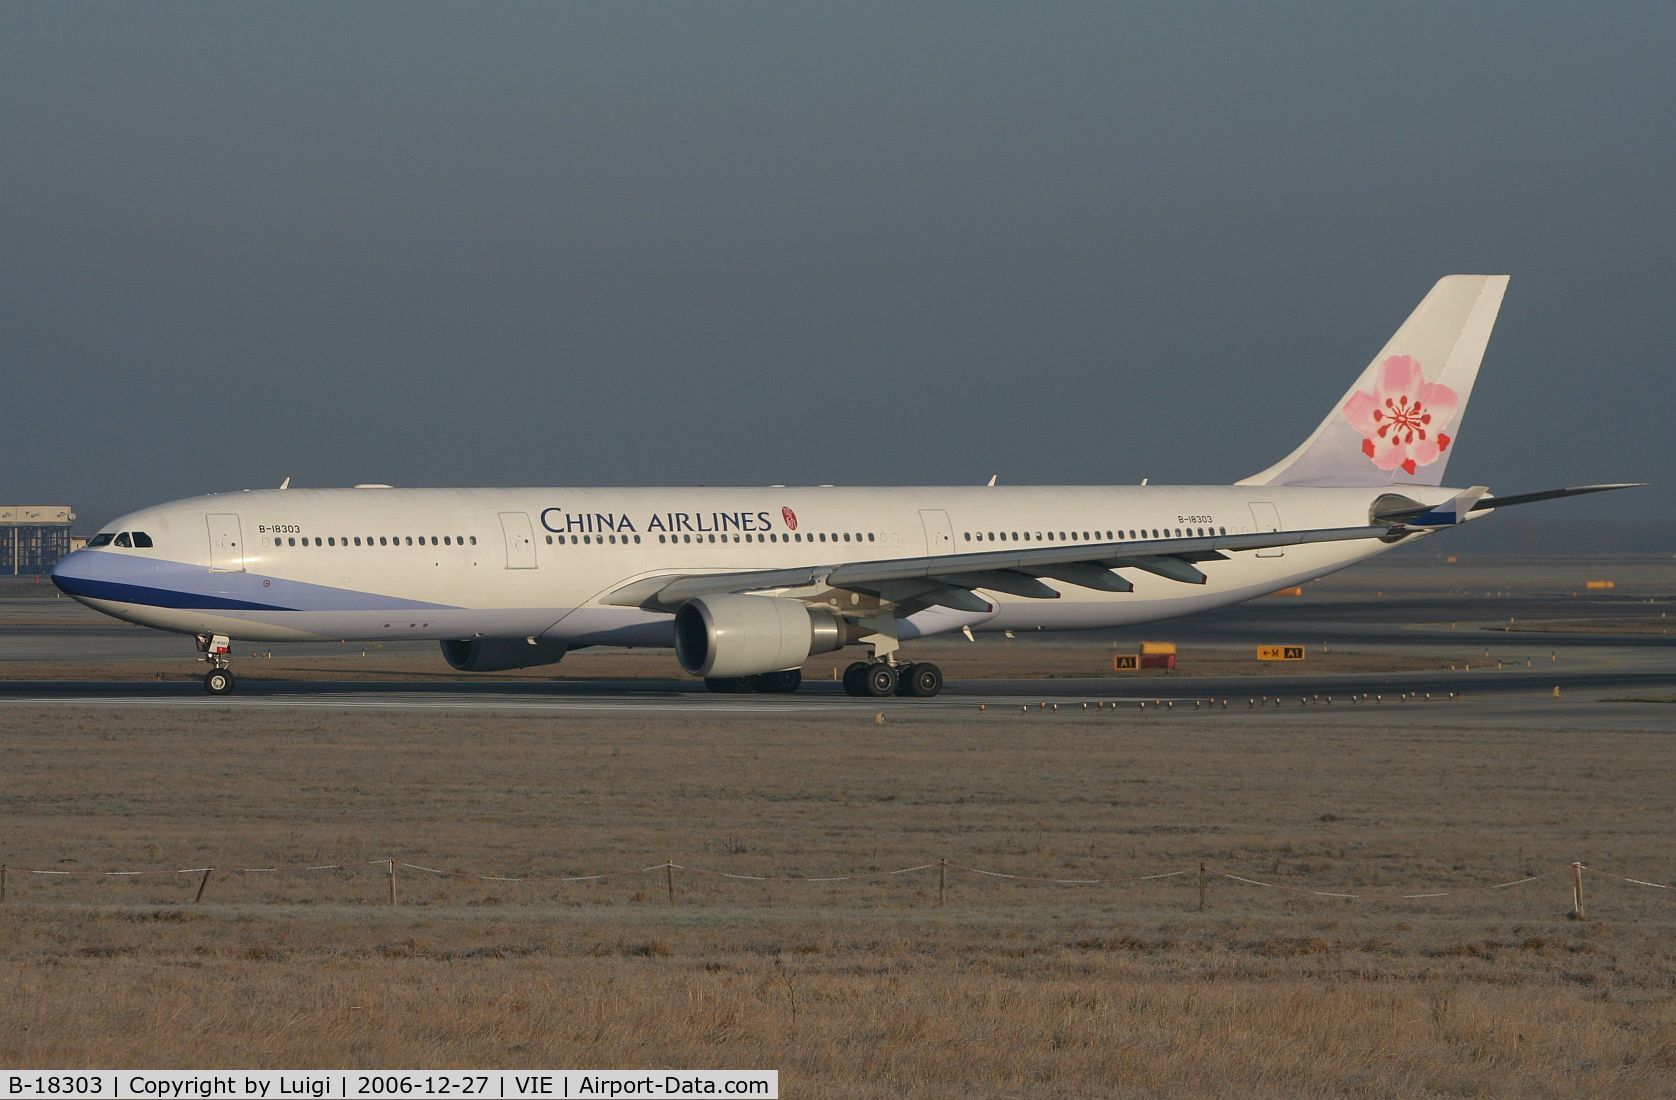 B-18303, 2004 Airbus A330-302 C/N 641, China Airlines A330-200